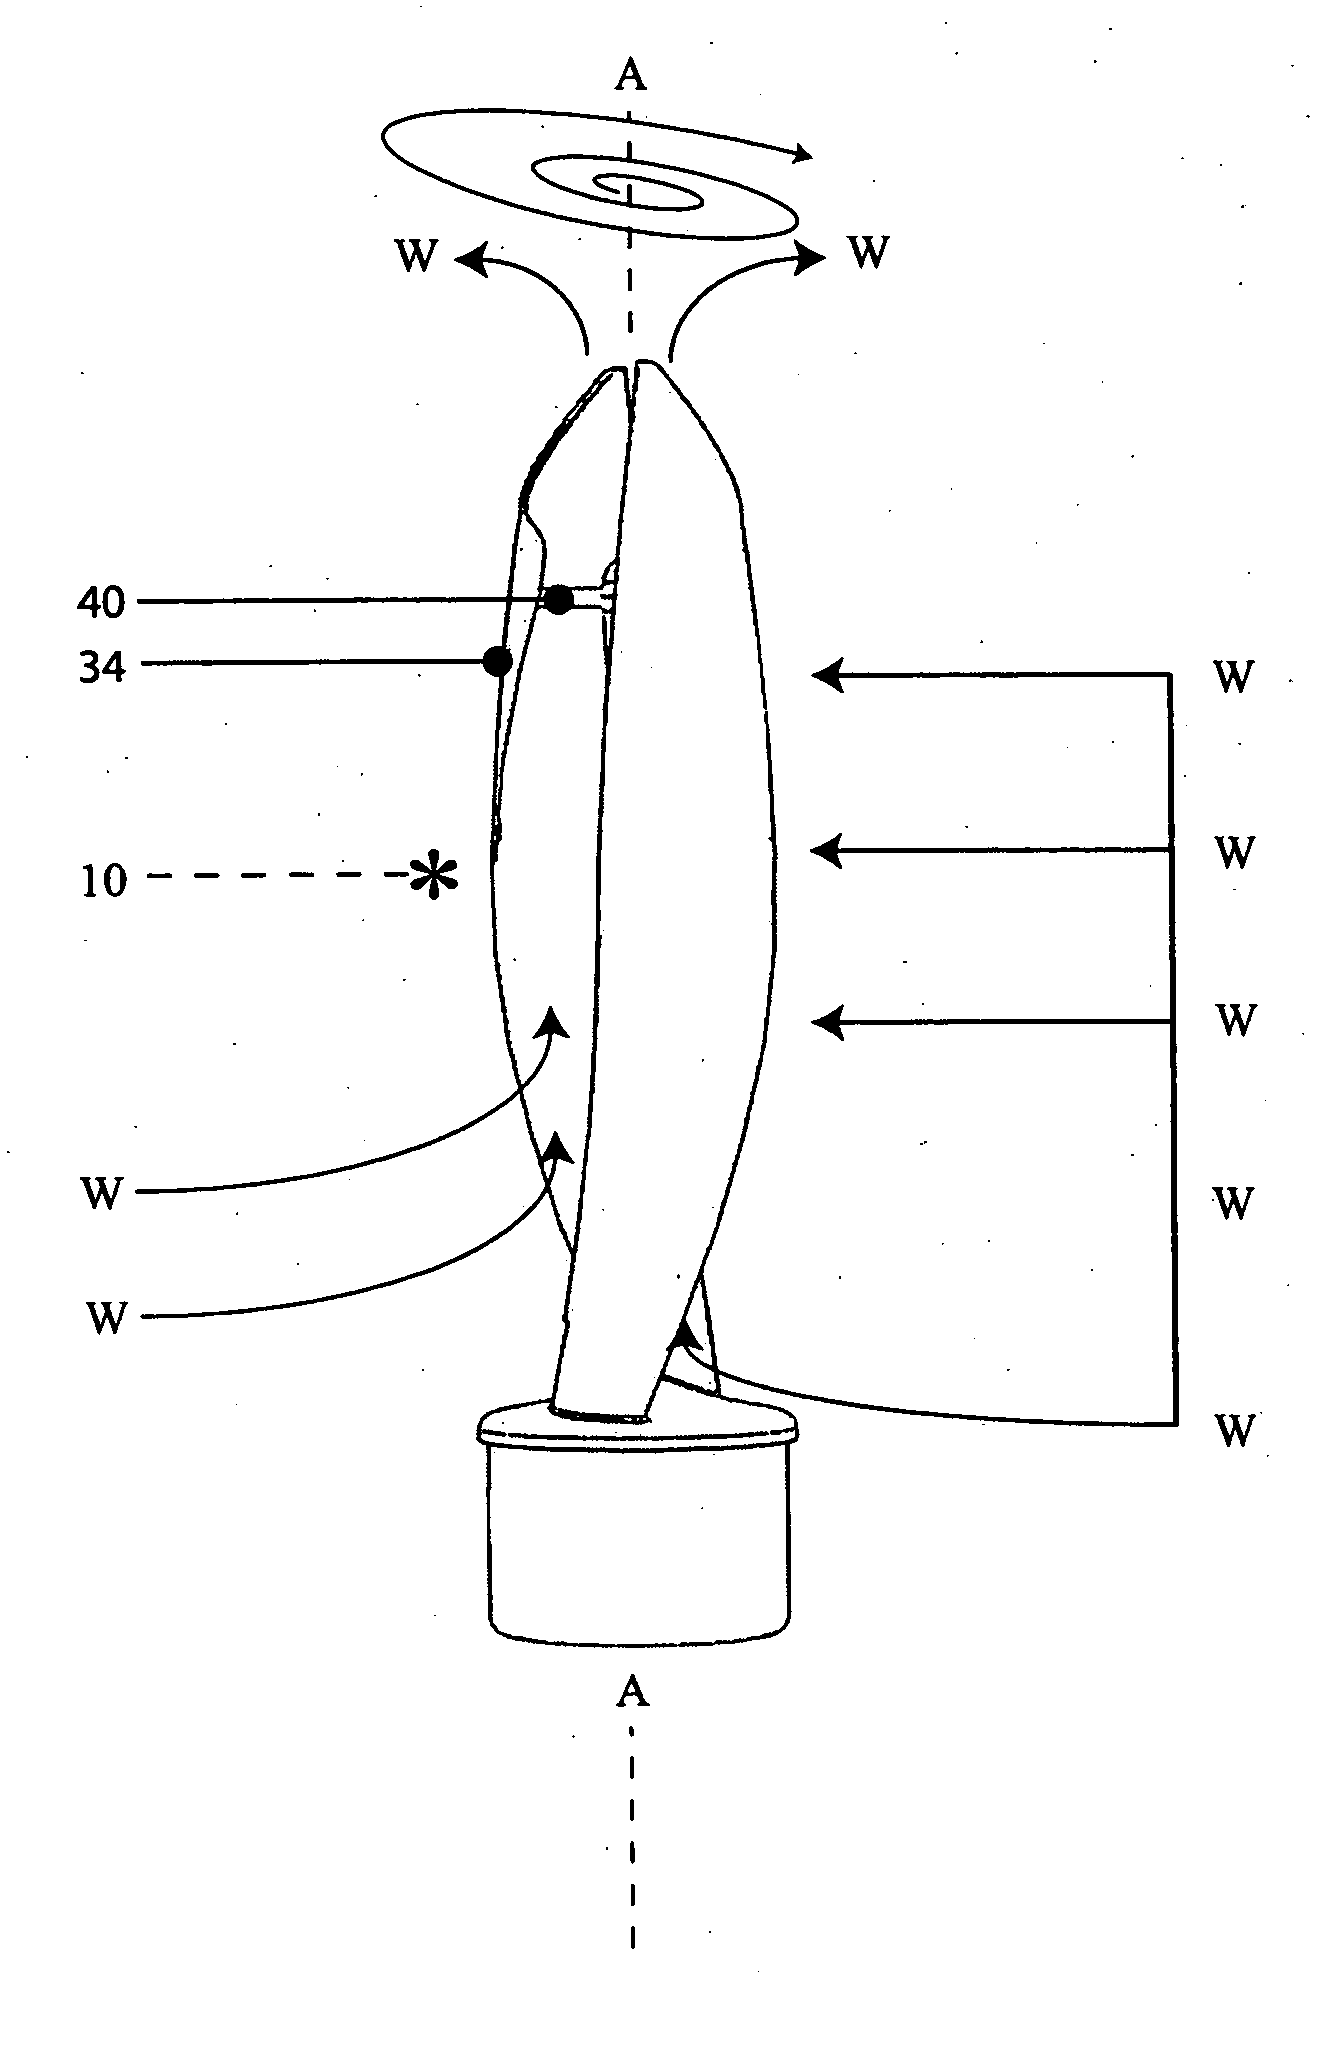 Helical taper induced vortical flow turbine